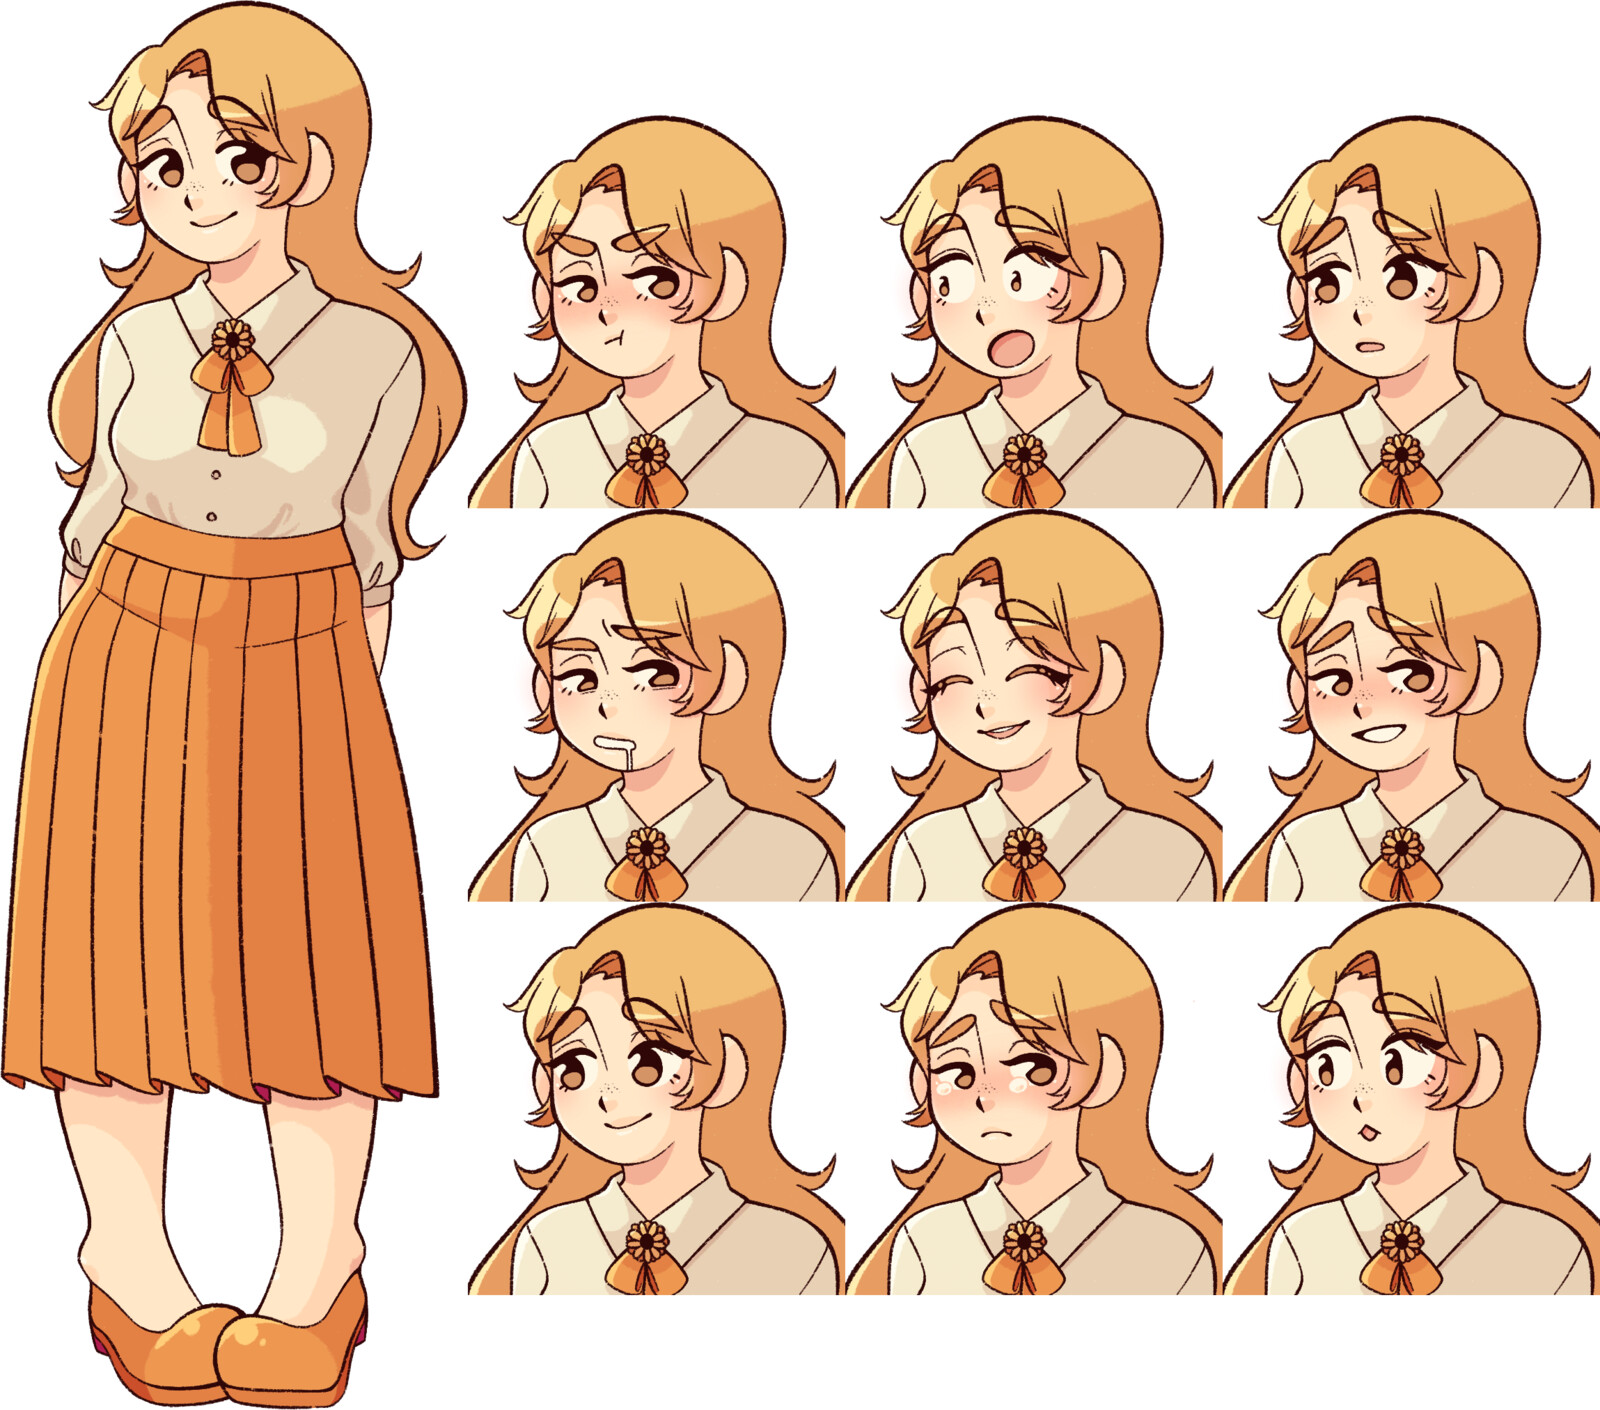 Sunny Full Body + Expressions